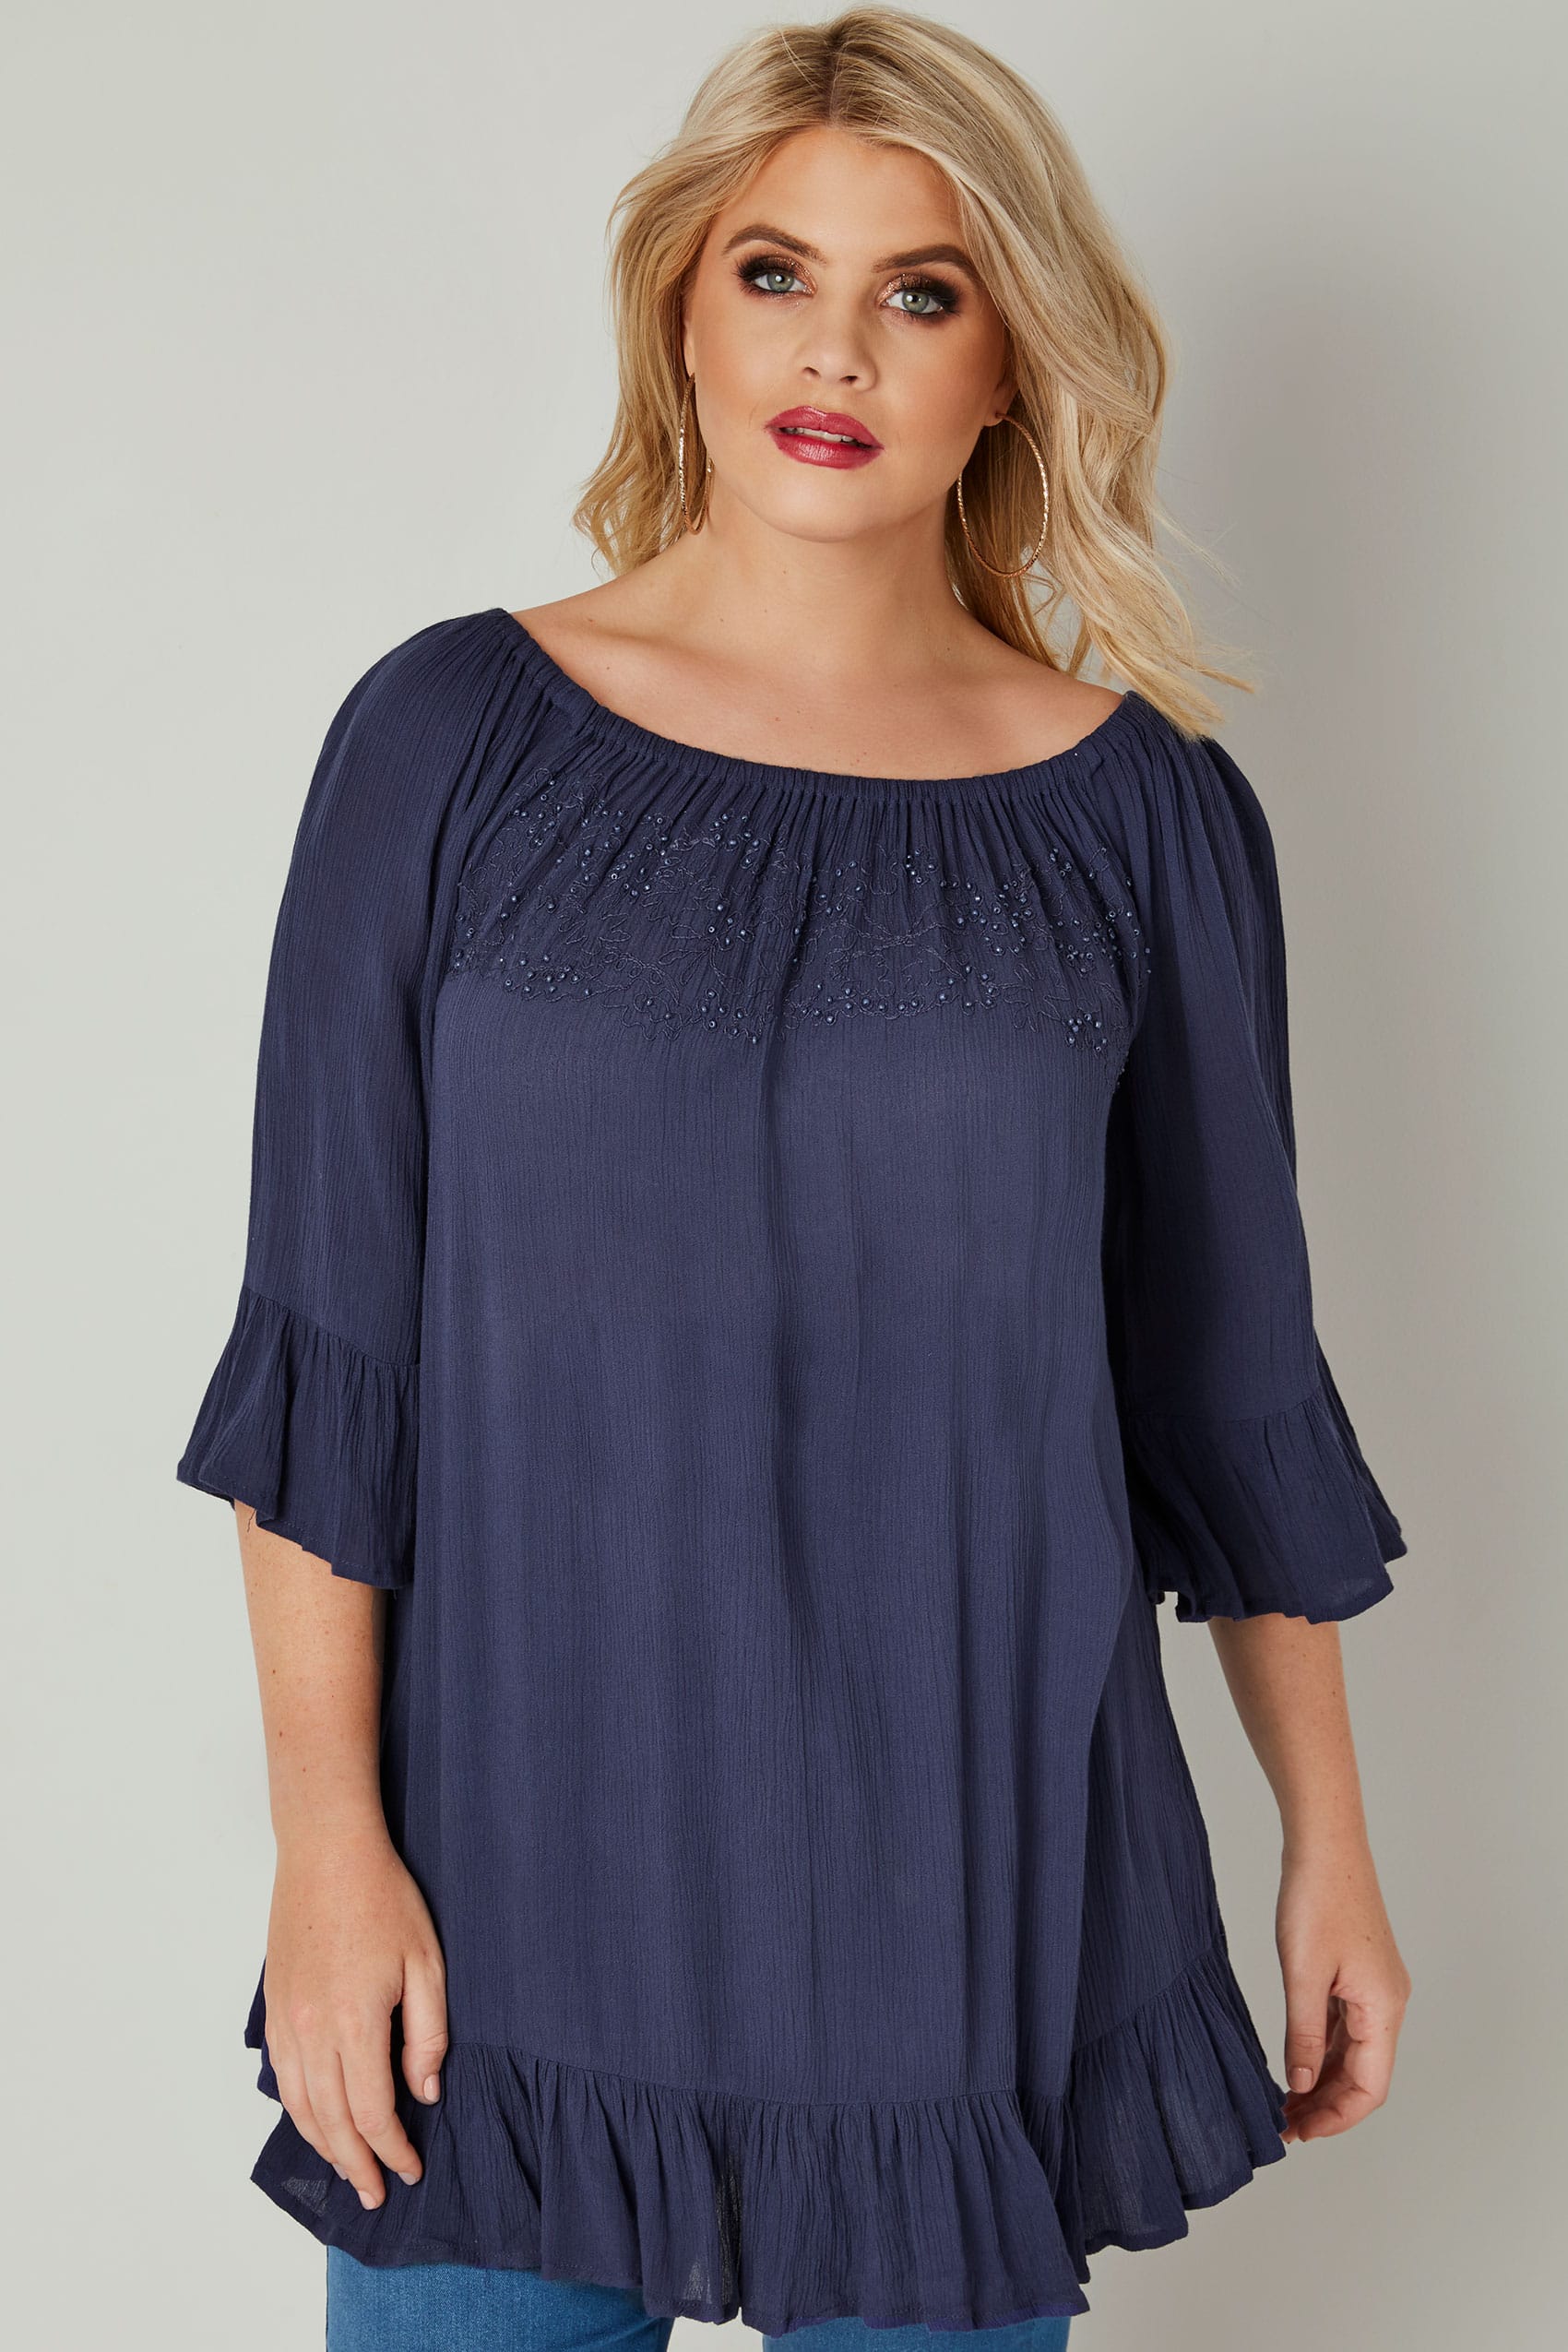 Navy Bardot Gypsy Top With Beaded Details & Flute Sleeves, Plus size 16 ...